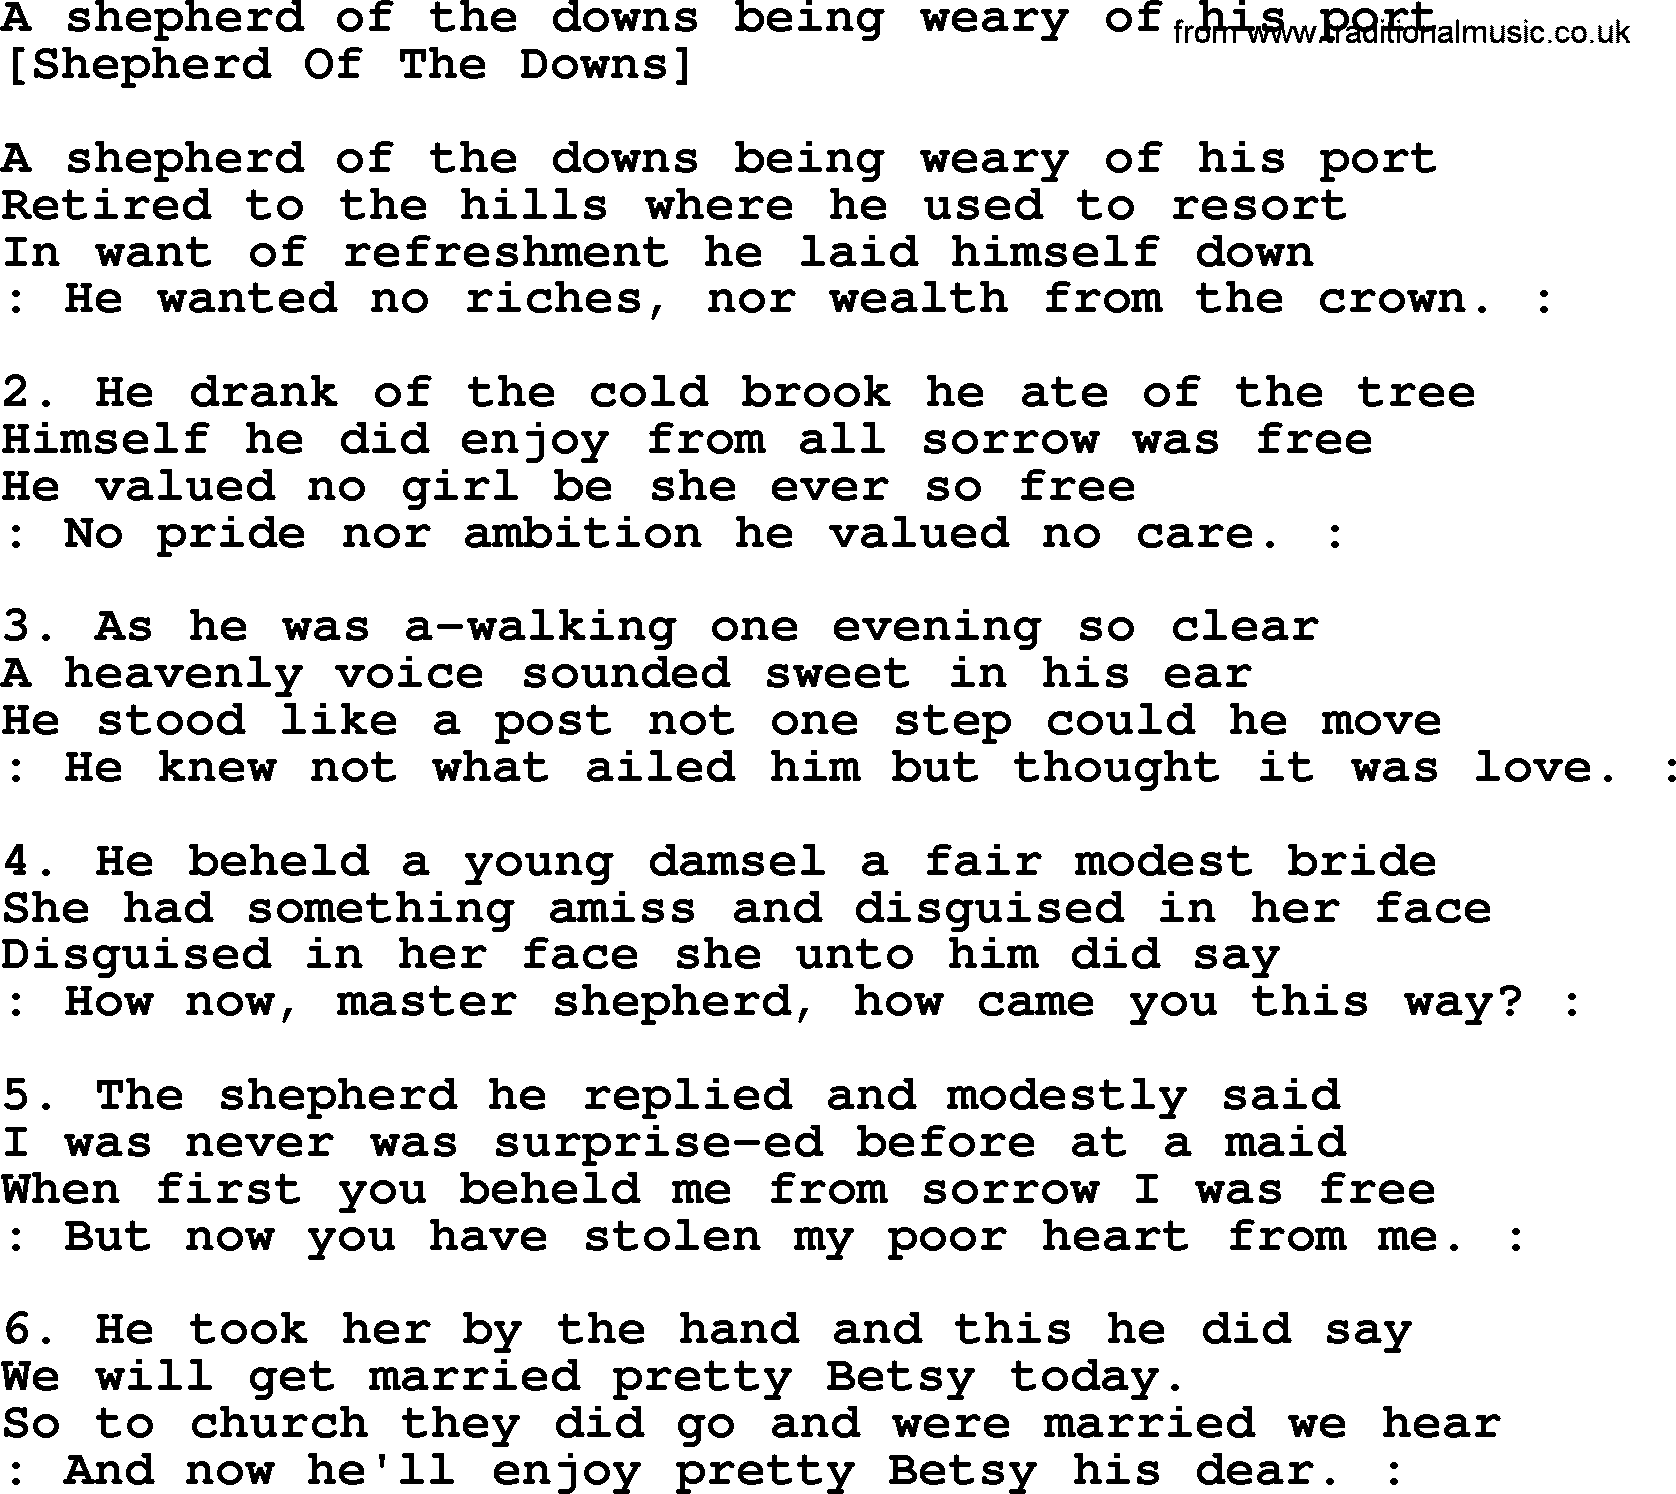 Old English Song: A Shepherd Of The Downs Being Weary Of His Port lyrics